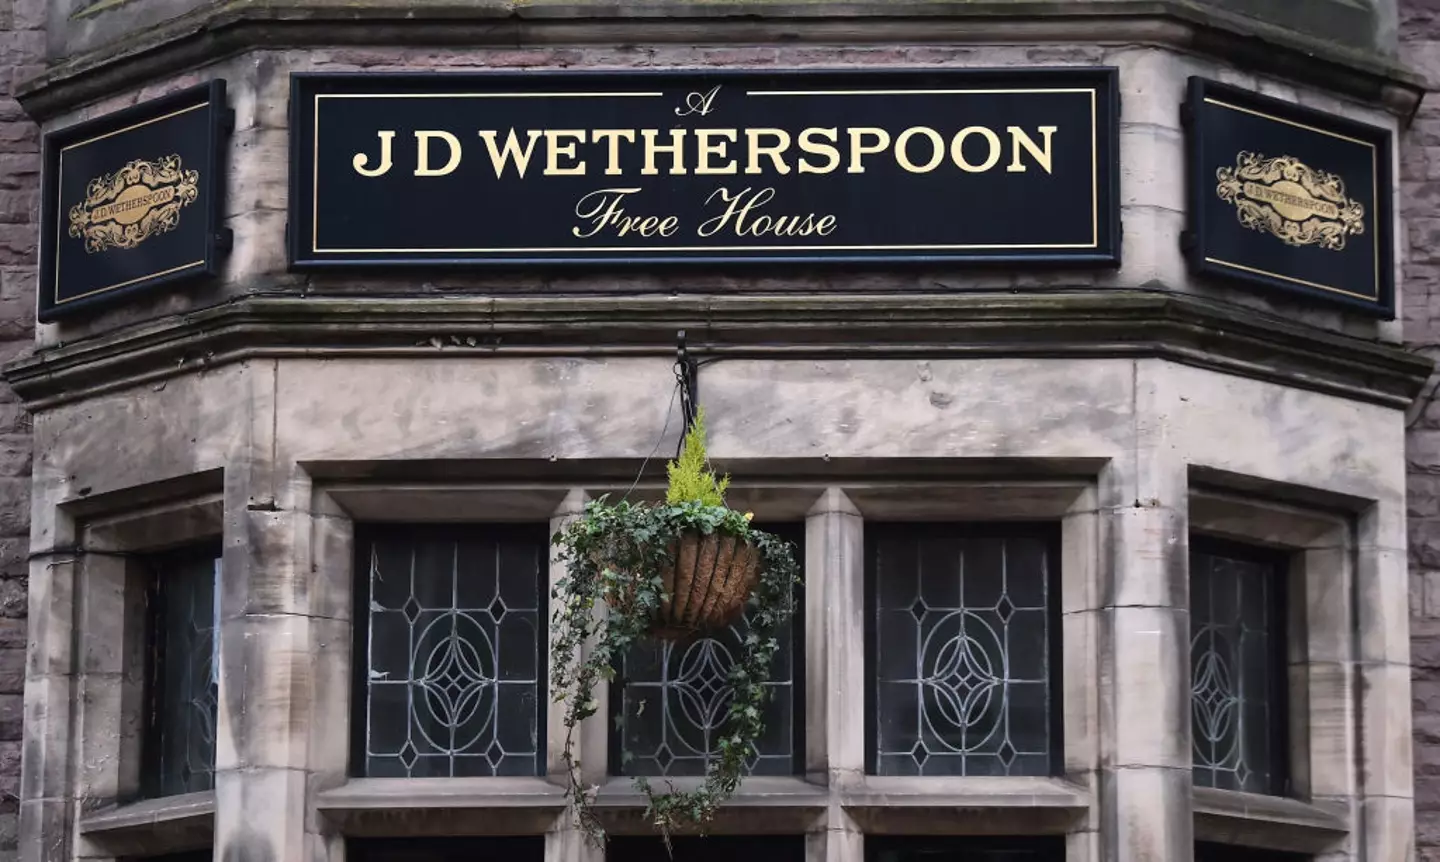 Wetherspoon will be serving festive fayre from November 15.